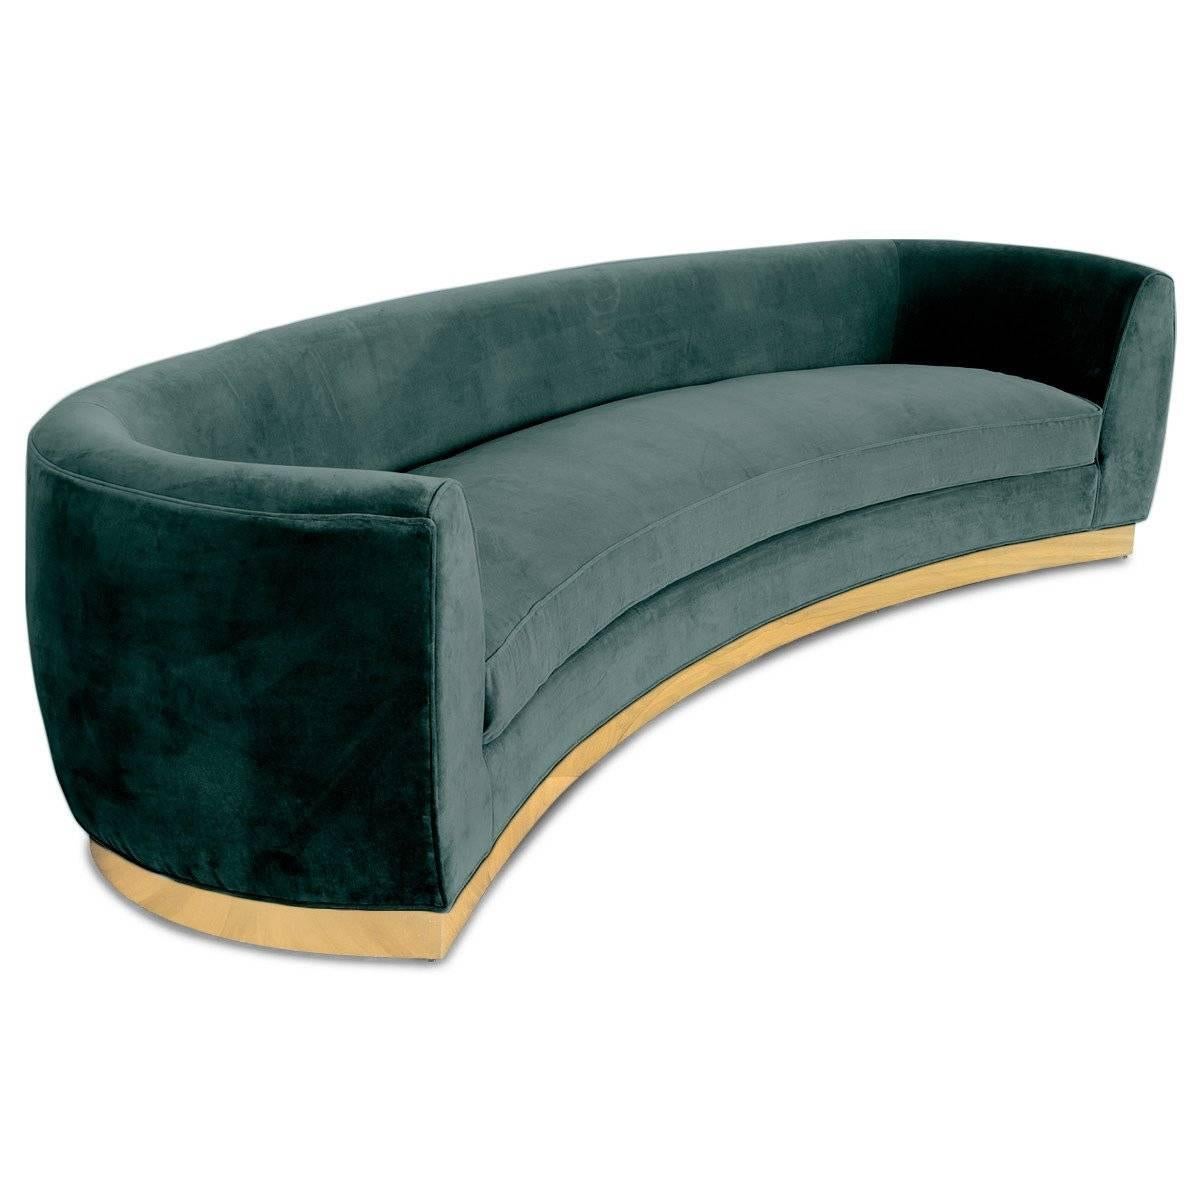 Art Deco Style St. Germain Curved Sofa in Velvet with Brass Toe-kick Base - 9 ft For Sale 11